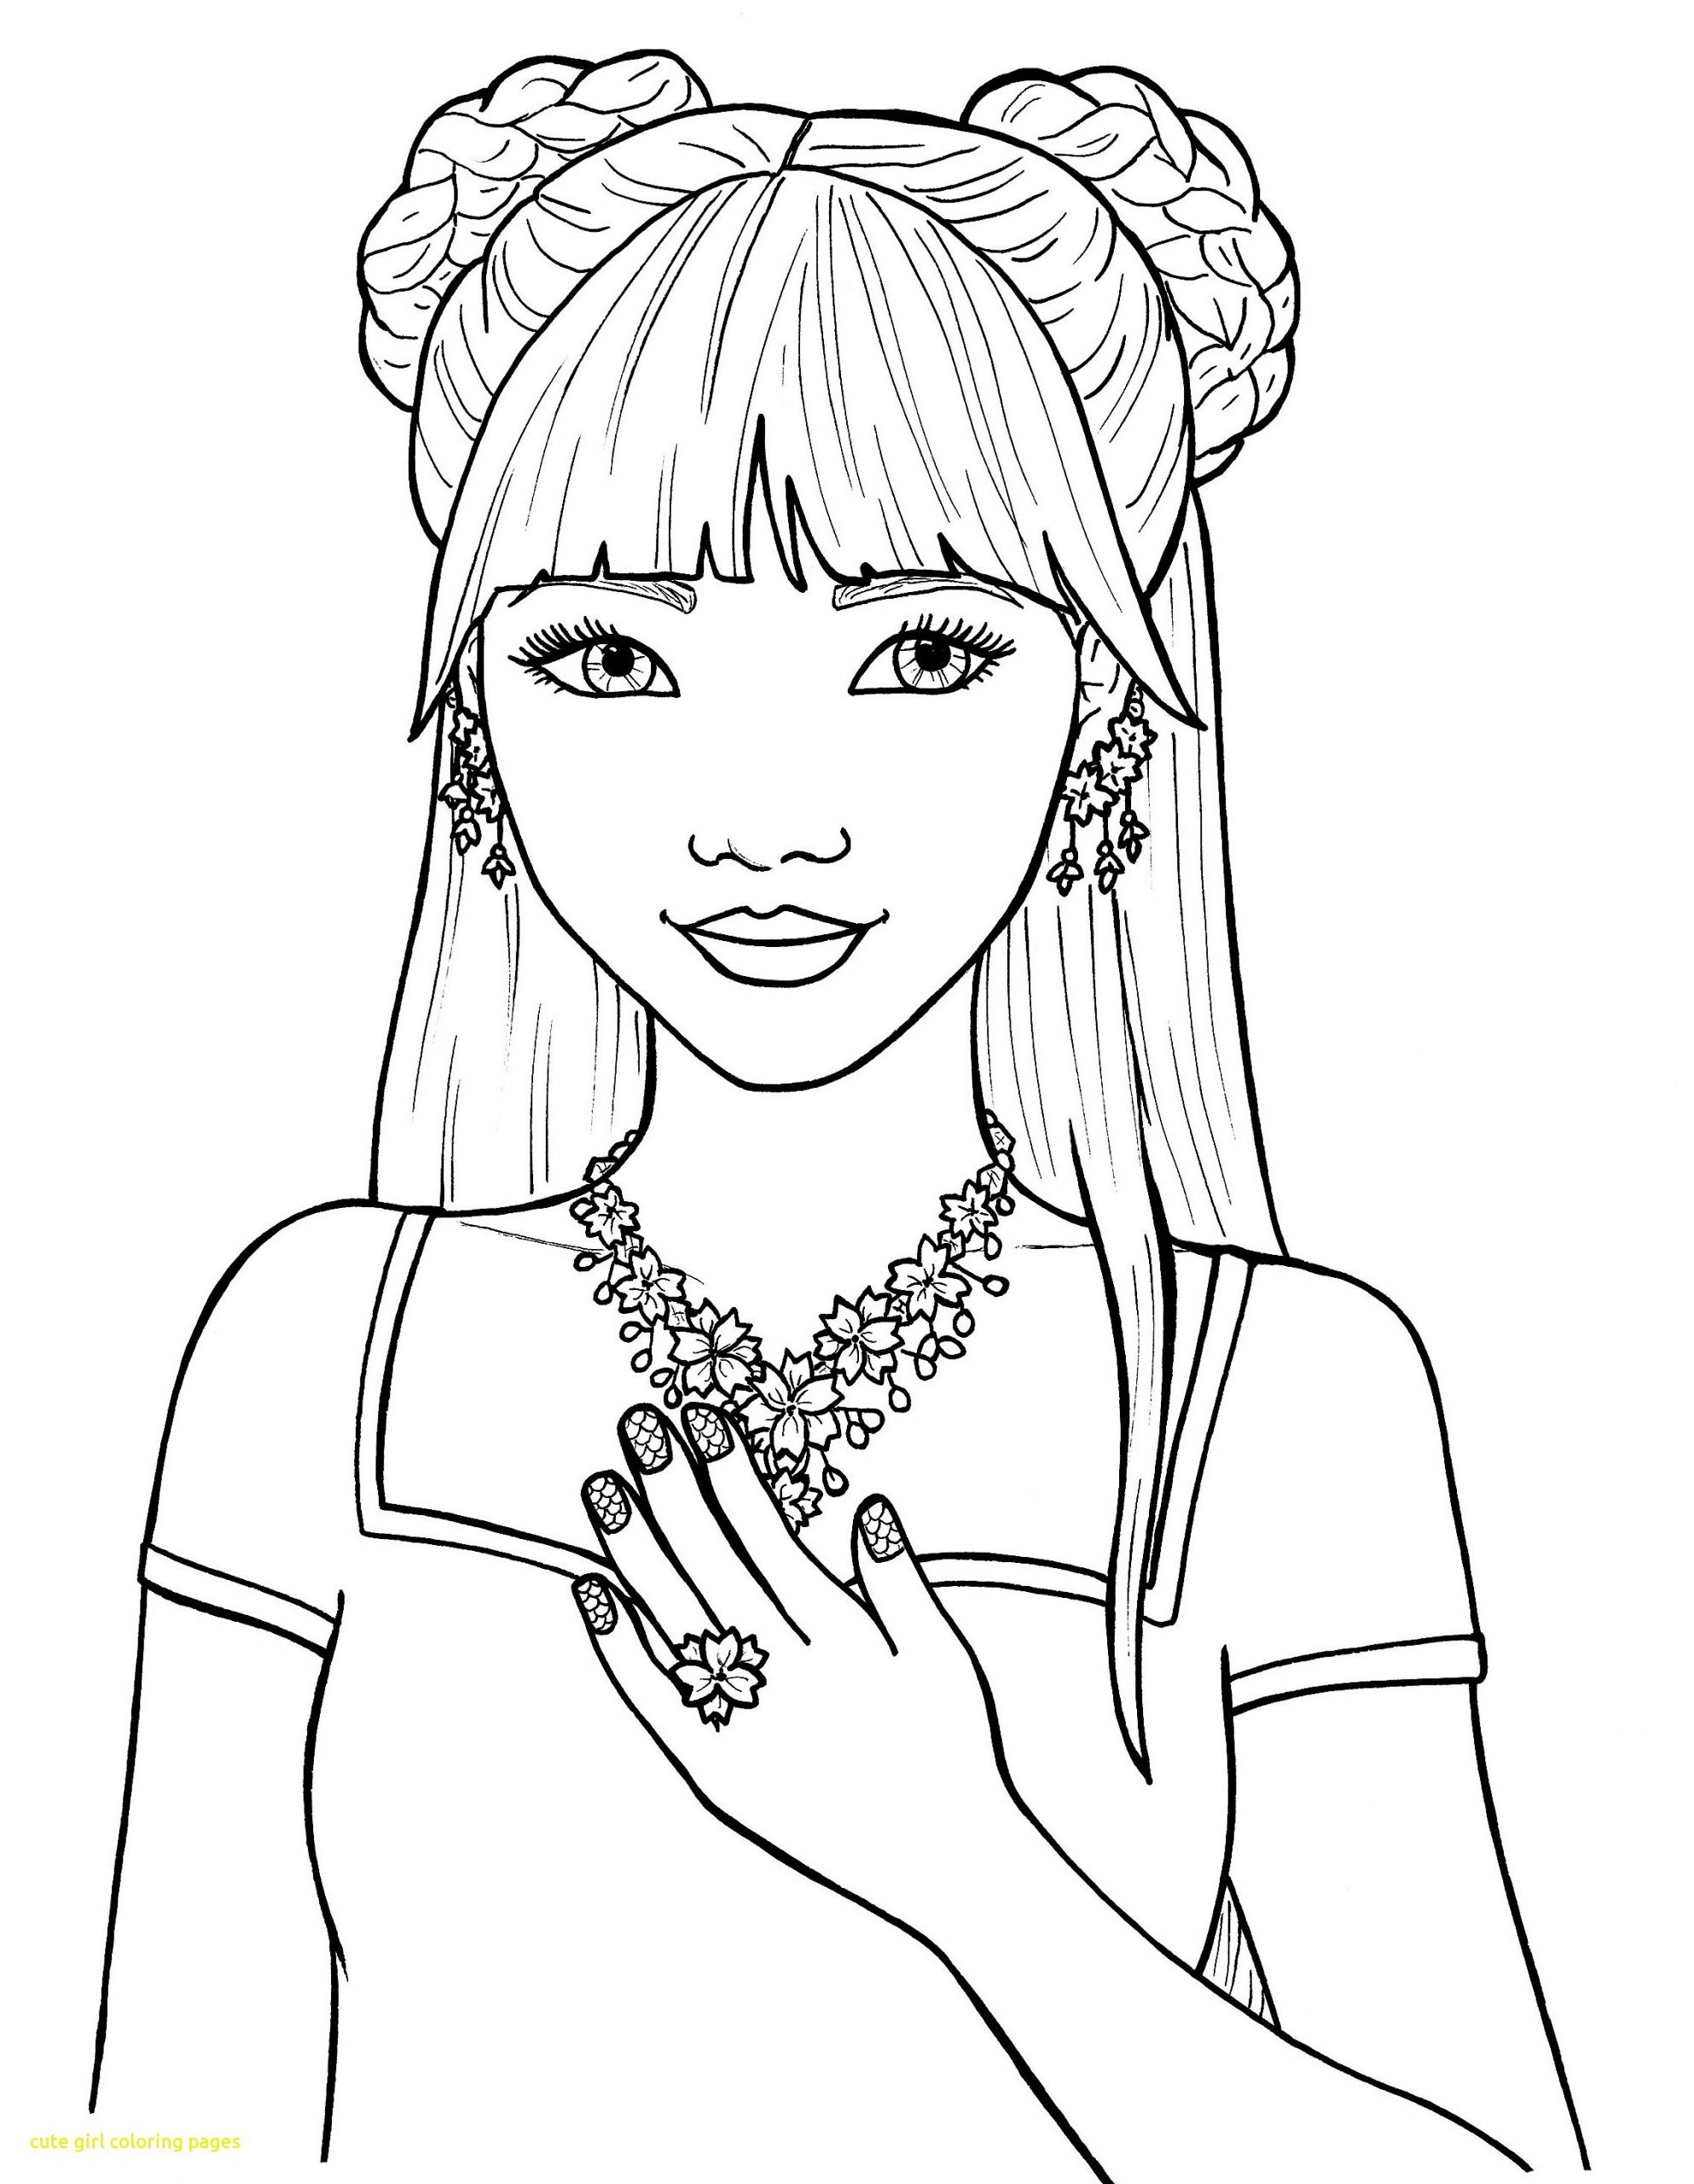 Coloring Sheet For Girls
 Coloring Pages for Girls Best Coloring Pages For Kids